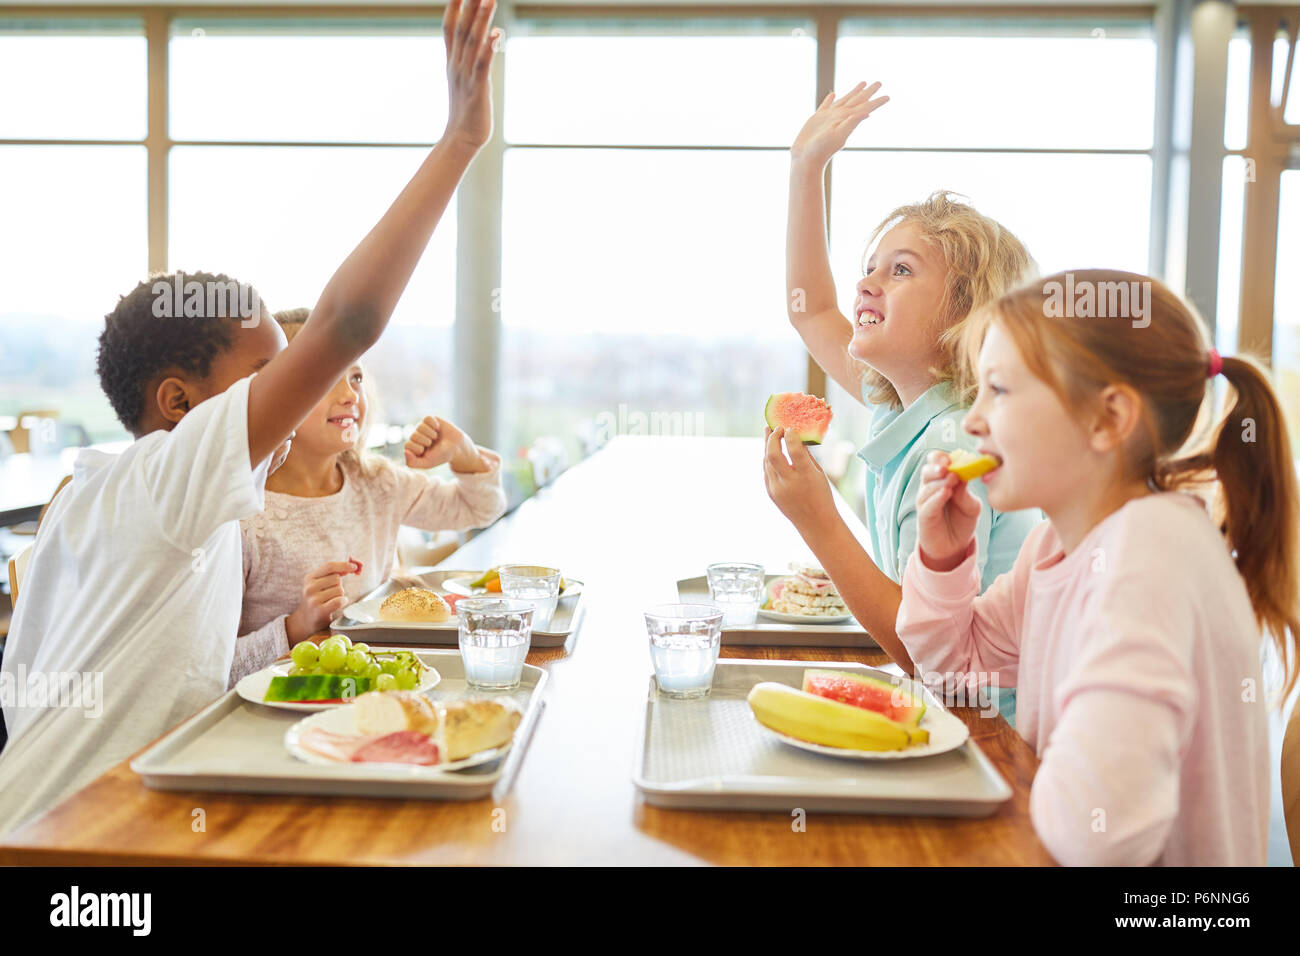 Group of children in the canteen having lunch or breakfast are having fun Stock Photo